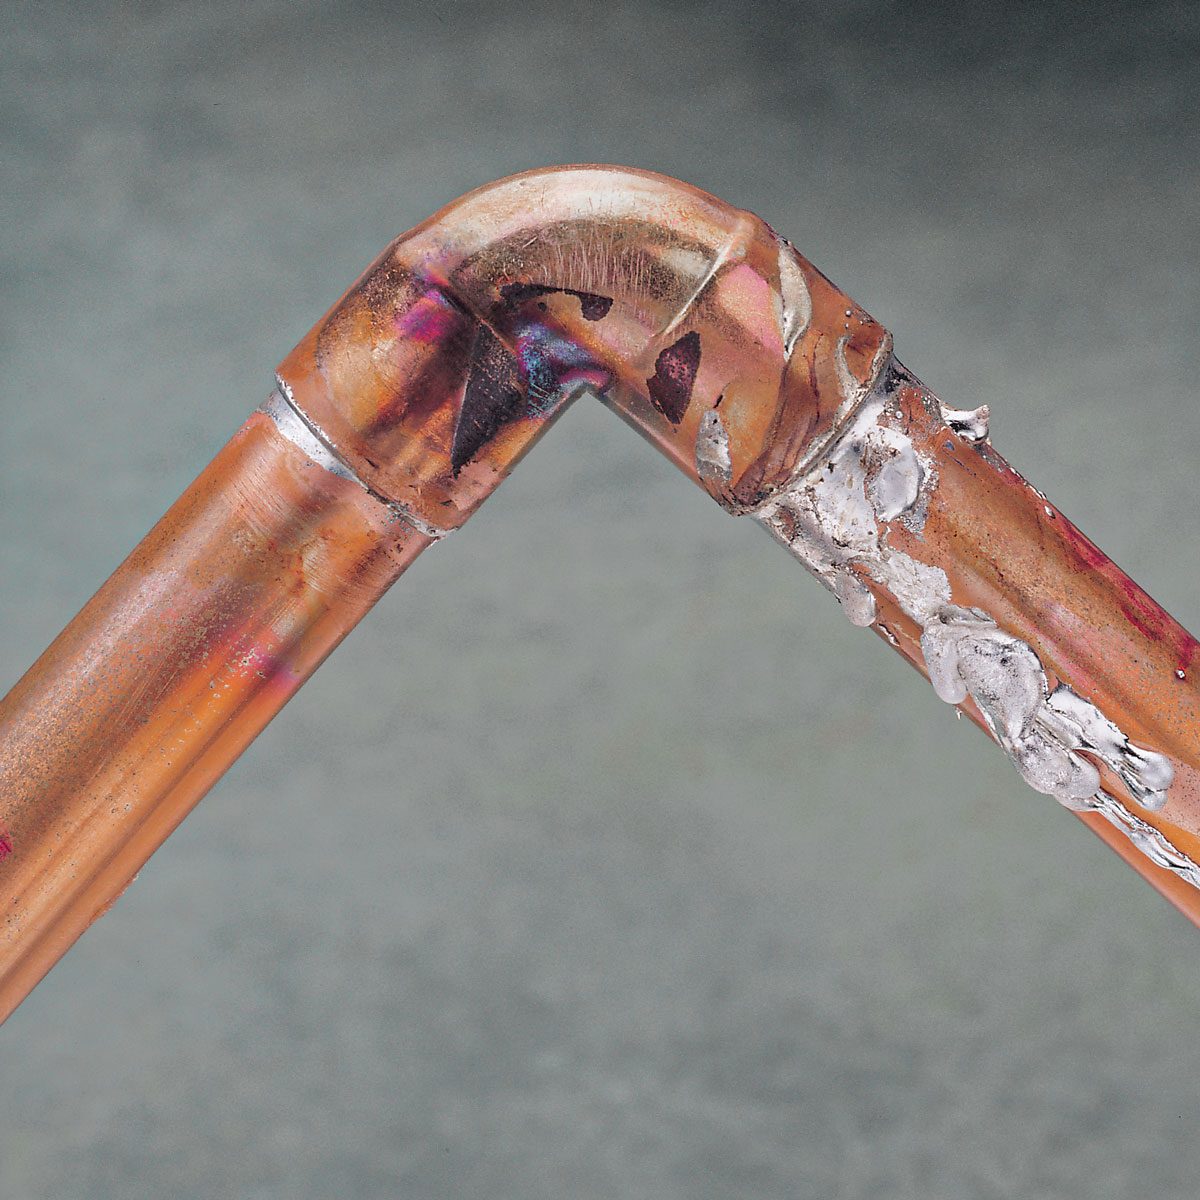 How To Solder Copper Pipes - The Home Depot